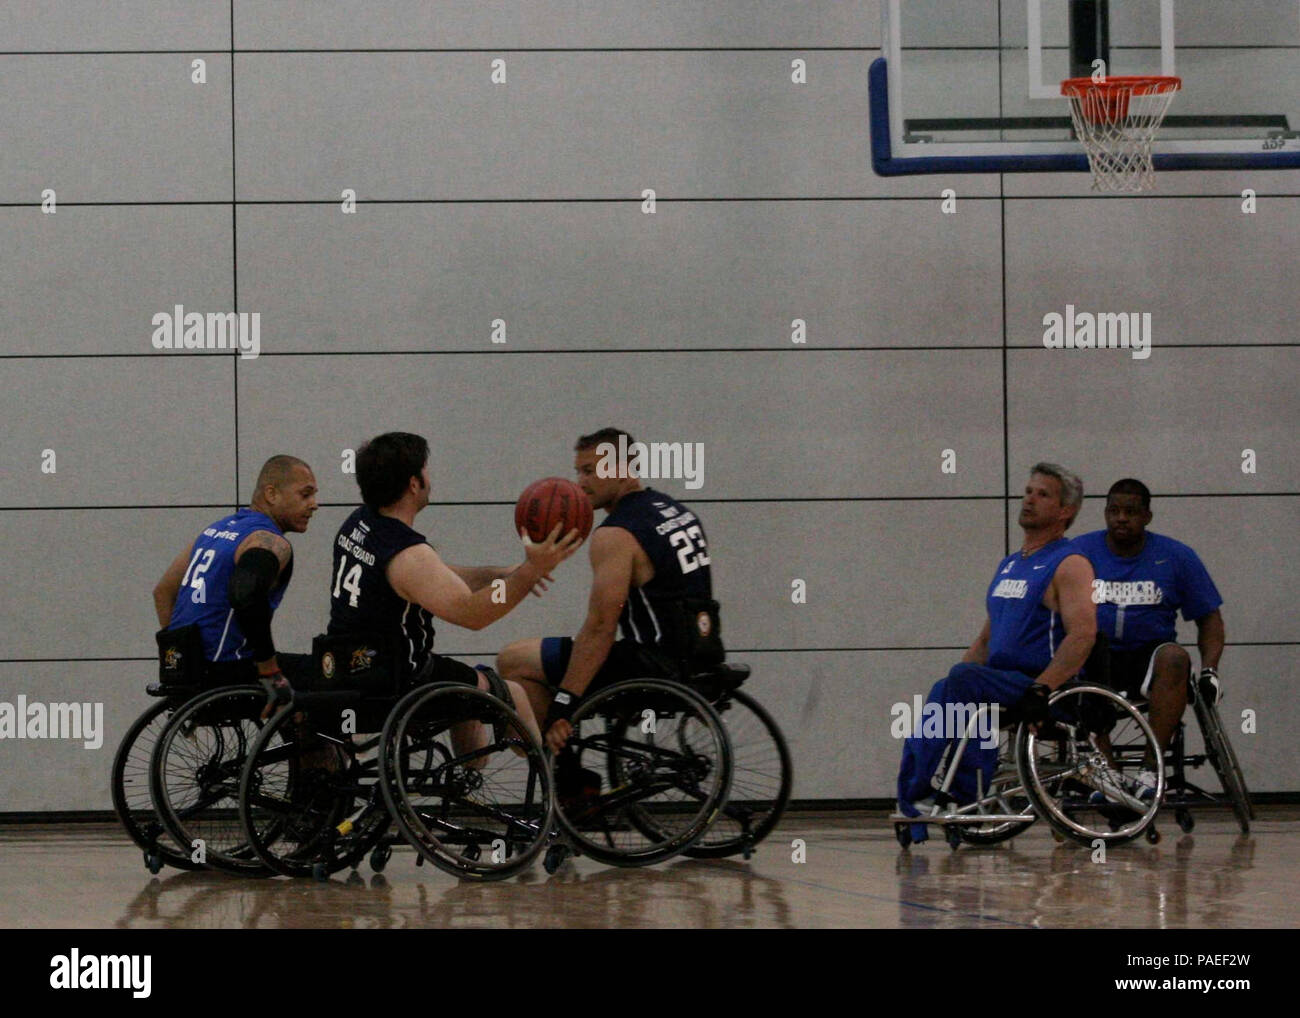 Team Navy/Coast Guard member, retired Explosive Ordnance Disposal 1st Class John Kremer of Buford, Ga., prepares to shoot the ball during a game of wheelchair basketball against Team Air Force, May 14 at the 2013 Warrior Games. The Warrior Games includes competitions in archery, cycling, seated volleyball, shooting, swimming, track and field, and wheelchair basketball. The goal of the Warrior Games is not necessarily to identify the most skilled athletes, but rather to demonstrate the incredible potential of wounded warriors through competitive sports. More than 200 wounded, ill, or injured se Stock Photo